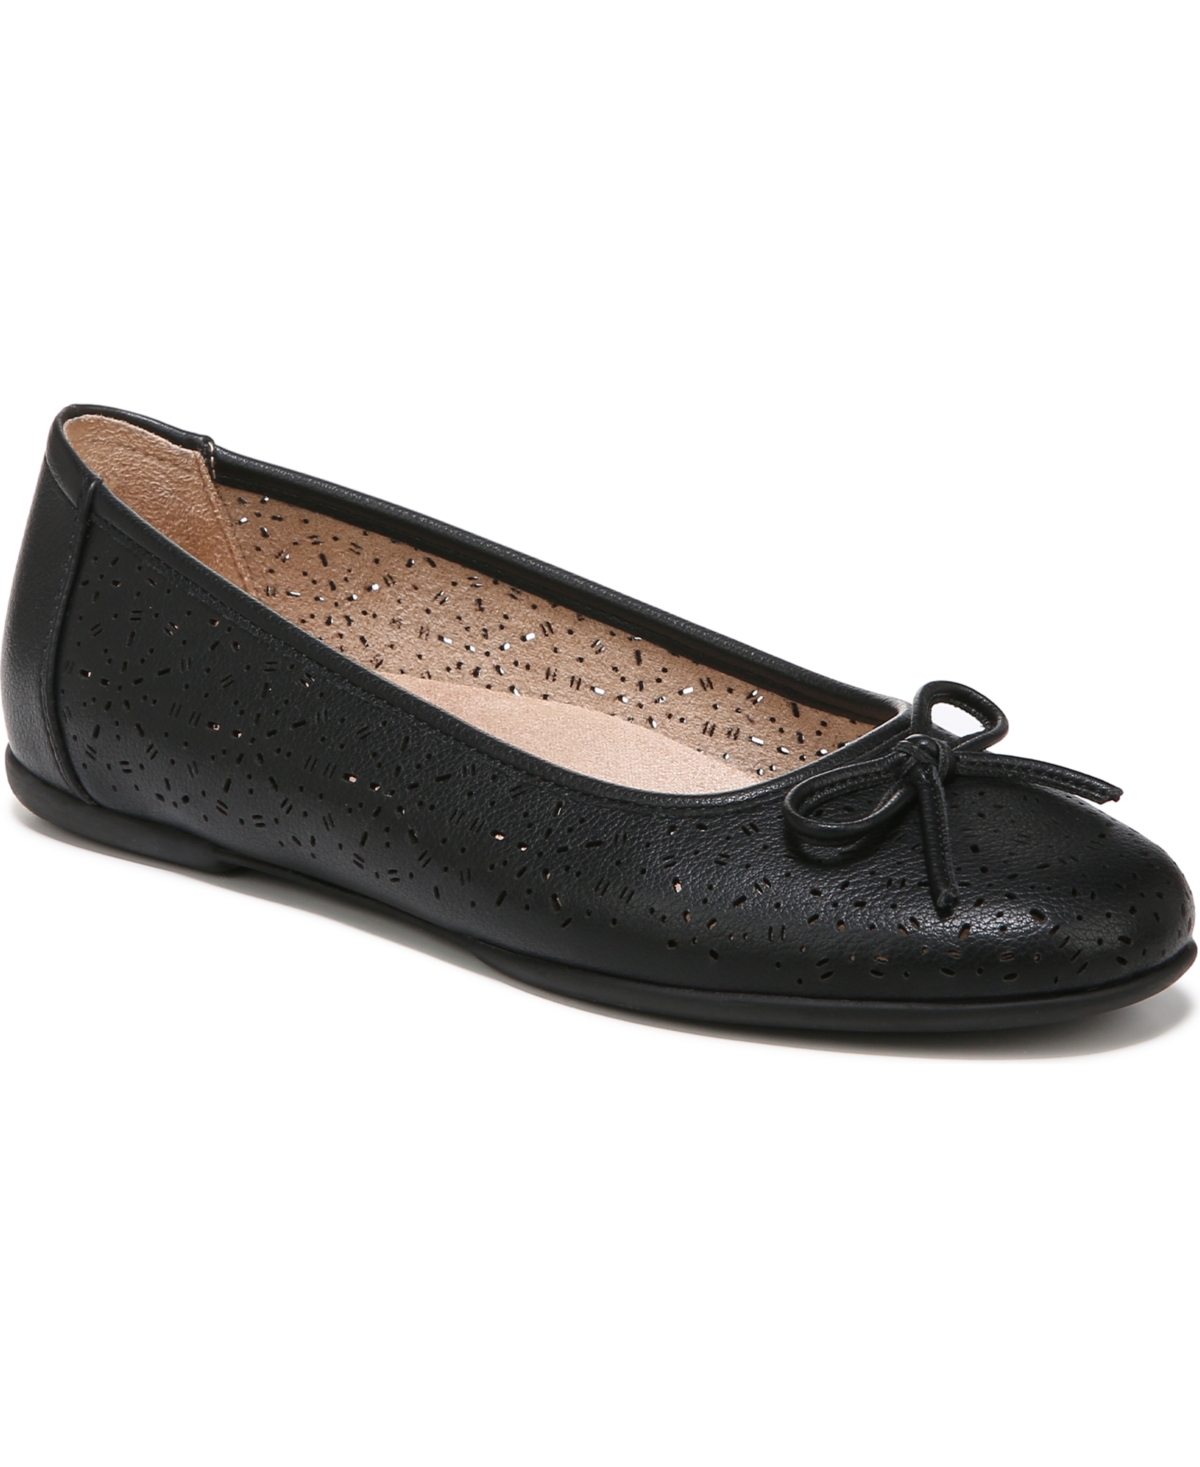 Magical Flats - Black Smooth Faux Leather